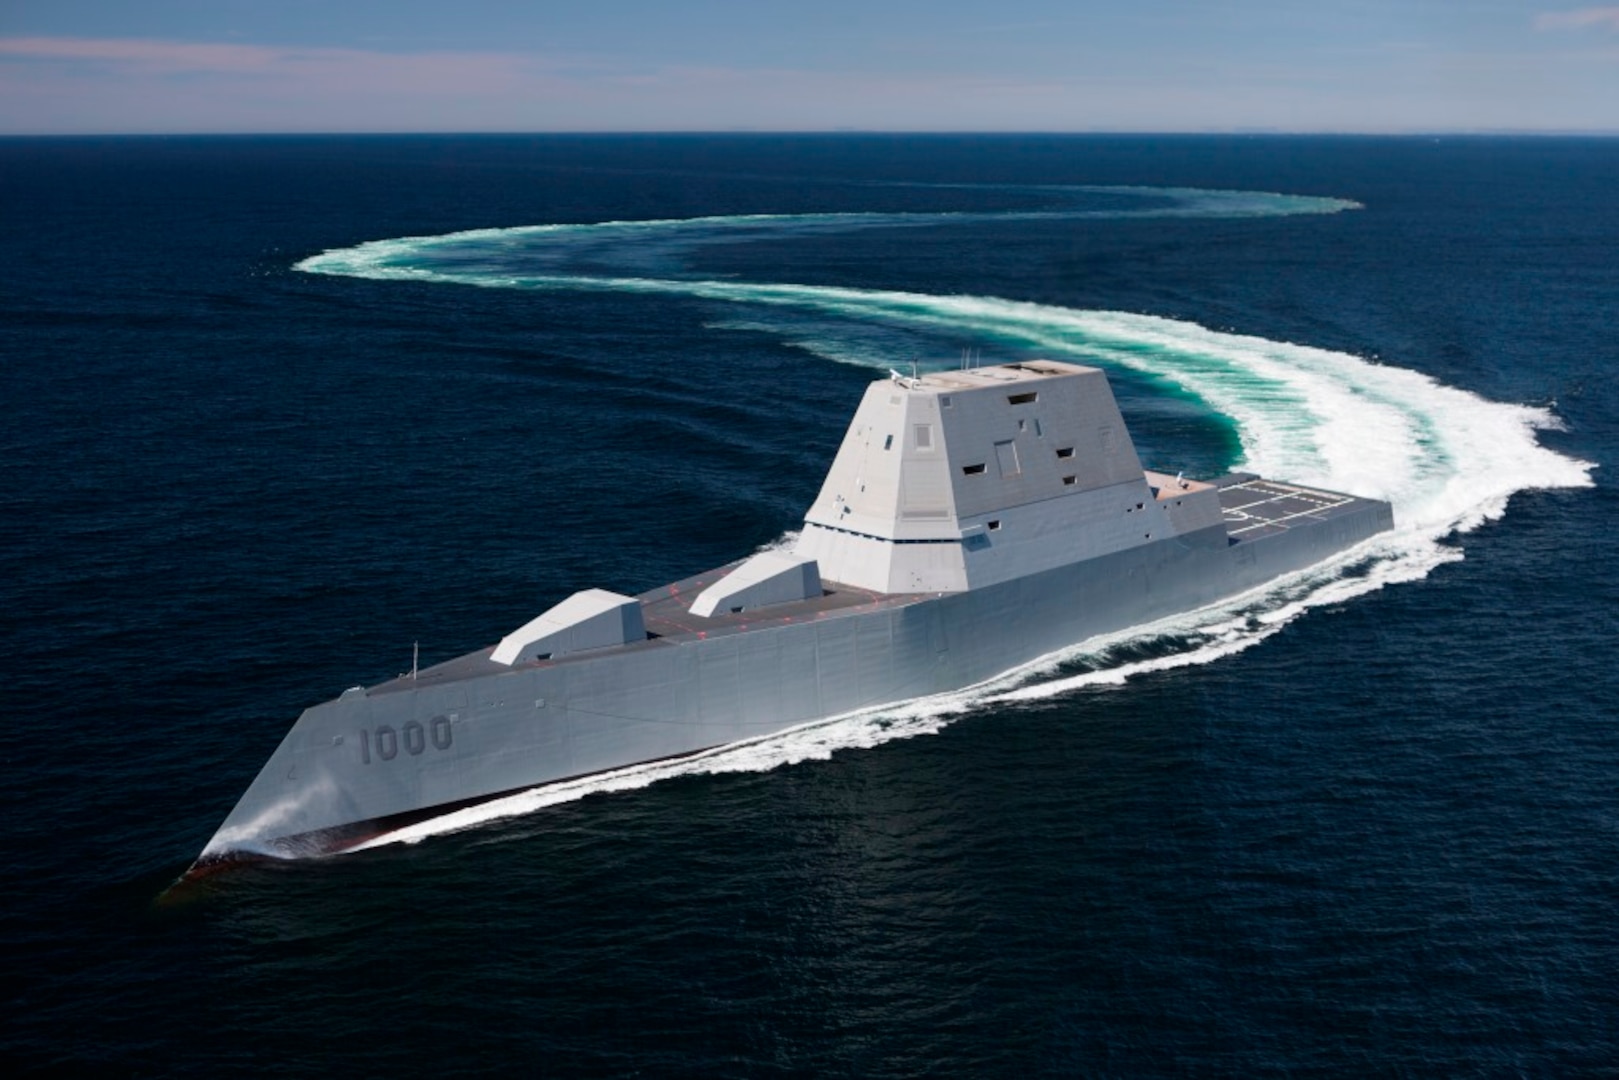 160421-N-YE579-005 (May 20, 2016) BATH, Maine - The U.S. Navy accepted delivery of DDG 1000, the future USS Zumwalt destroyer May 20. Following a crew certification period and October commissioning ceremony in Baltimore, Zumwalt will transit to her homeport in San Diego for a Post Delivery Availability and Mission Systems Activation. DDG 1000, pictured during acceptance trials in April, is the lead ship of the Zumwalt-class destroyers; next-generation multi-mission surface combatants tailored for land attack and littoral dominance. (U.S. Navy Released)